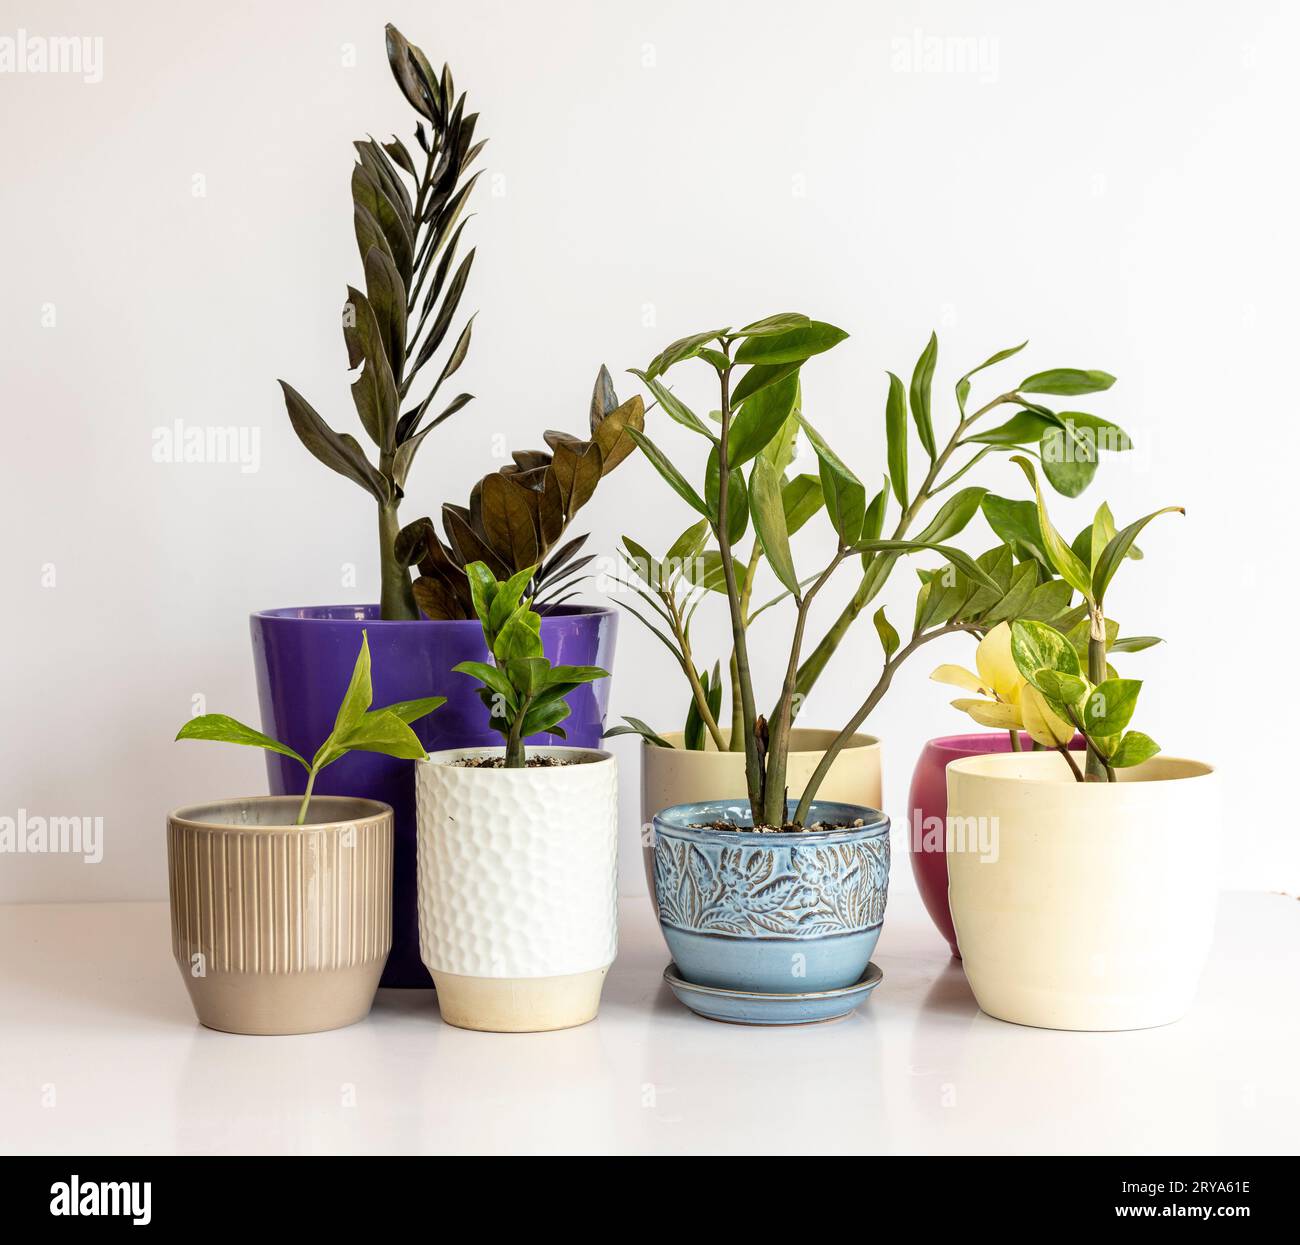 Set of different varieties of ZZ plants in a ceramic pots on white background Stock Photo